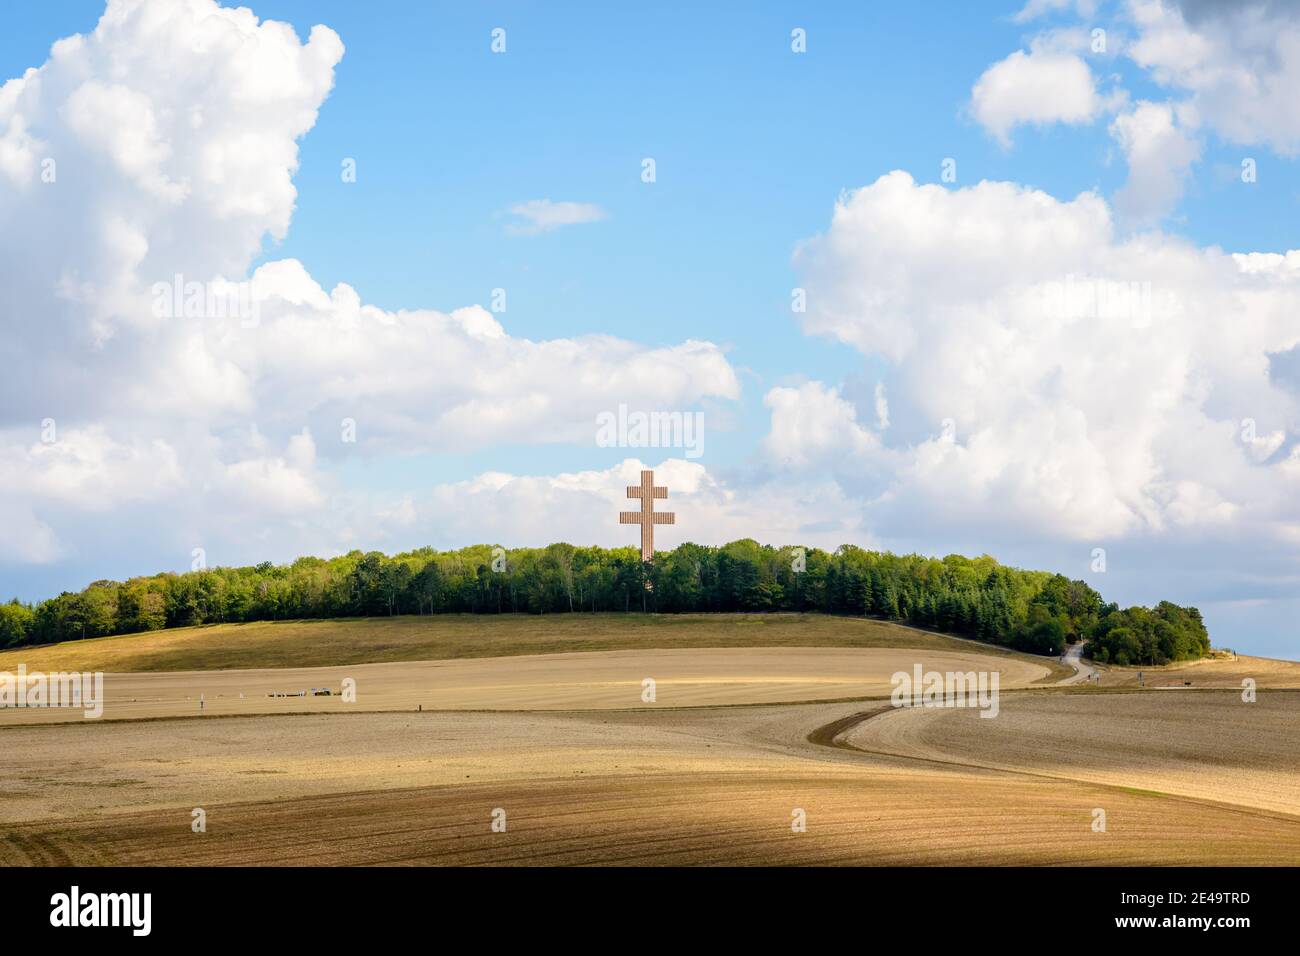 The large Cross of Lorraine of Charles de Gaulle Memorial dominates a rolling countryside landscape from the top of a hill. Stock Photo